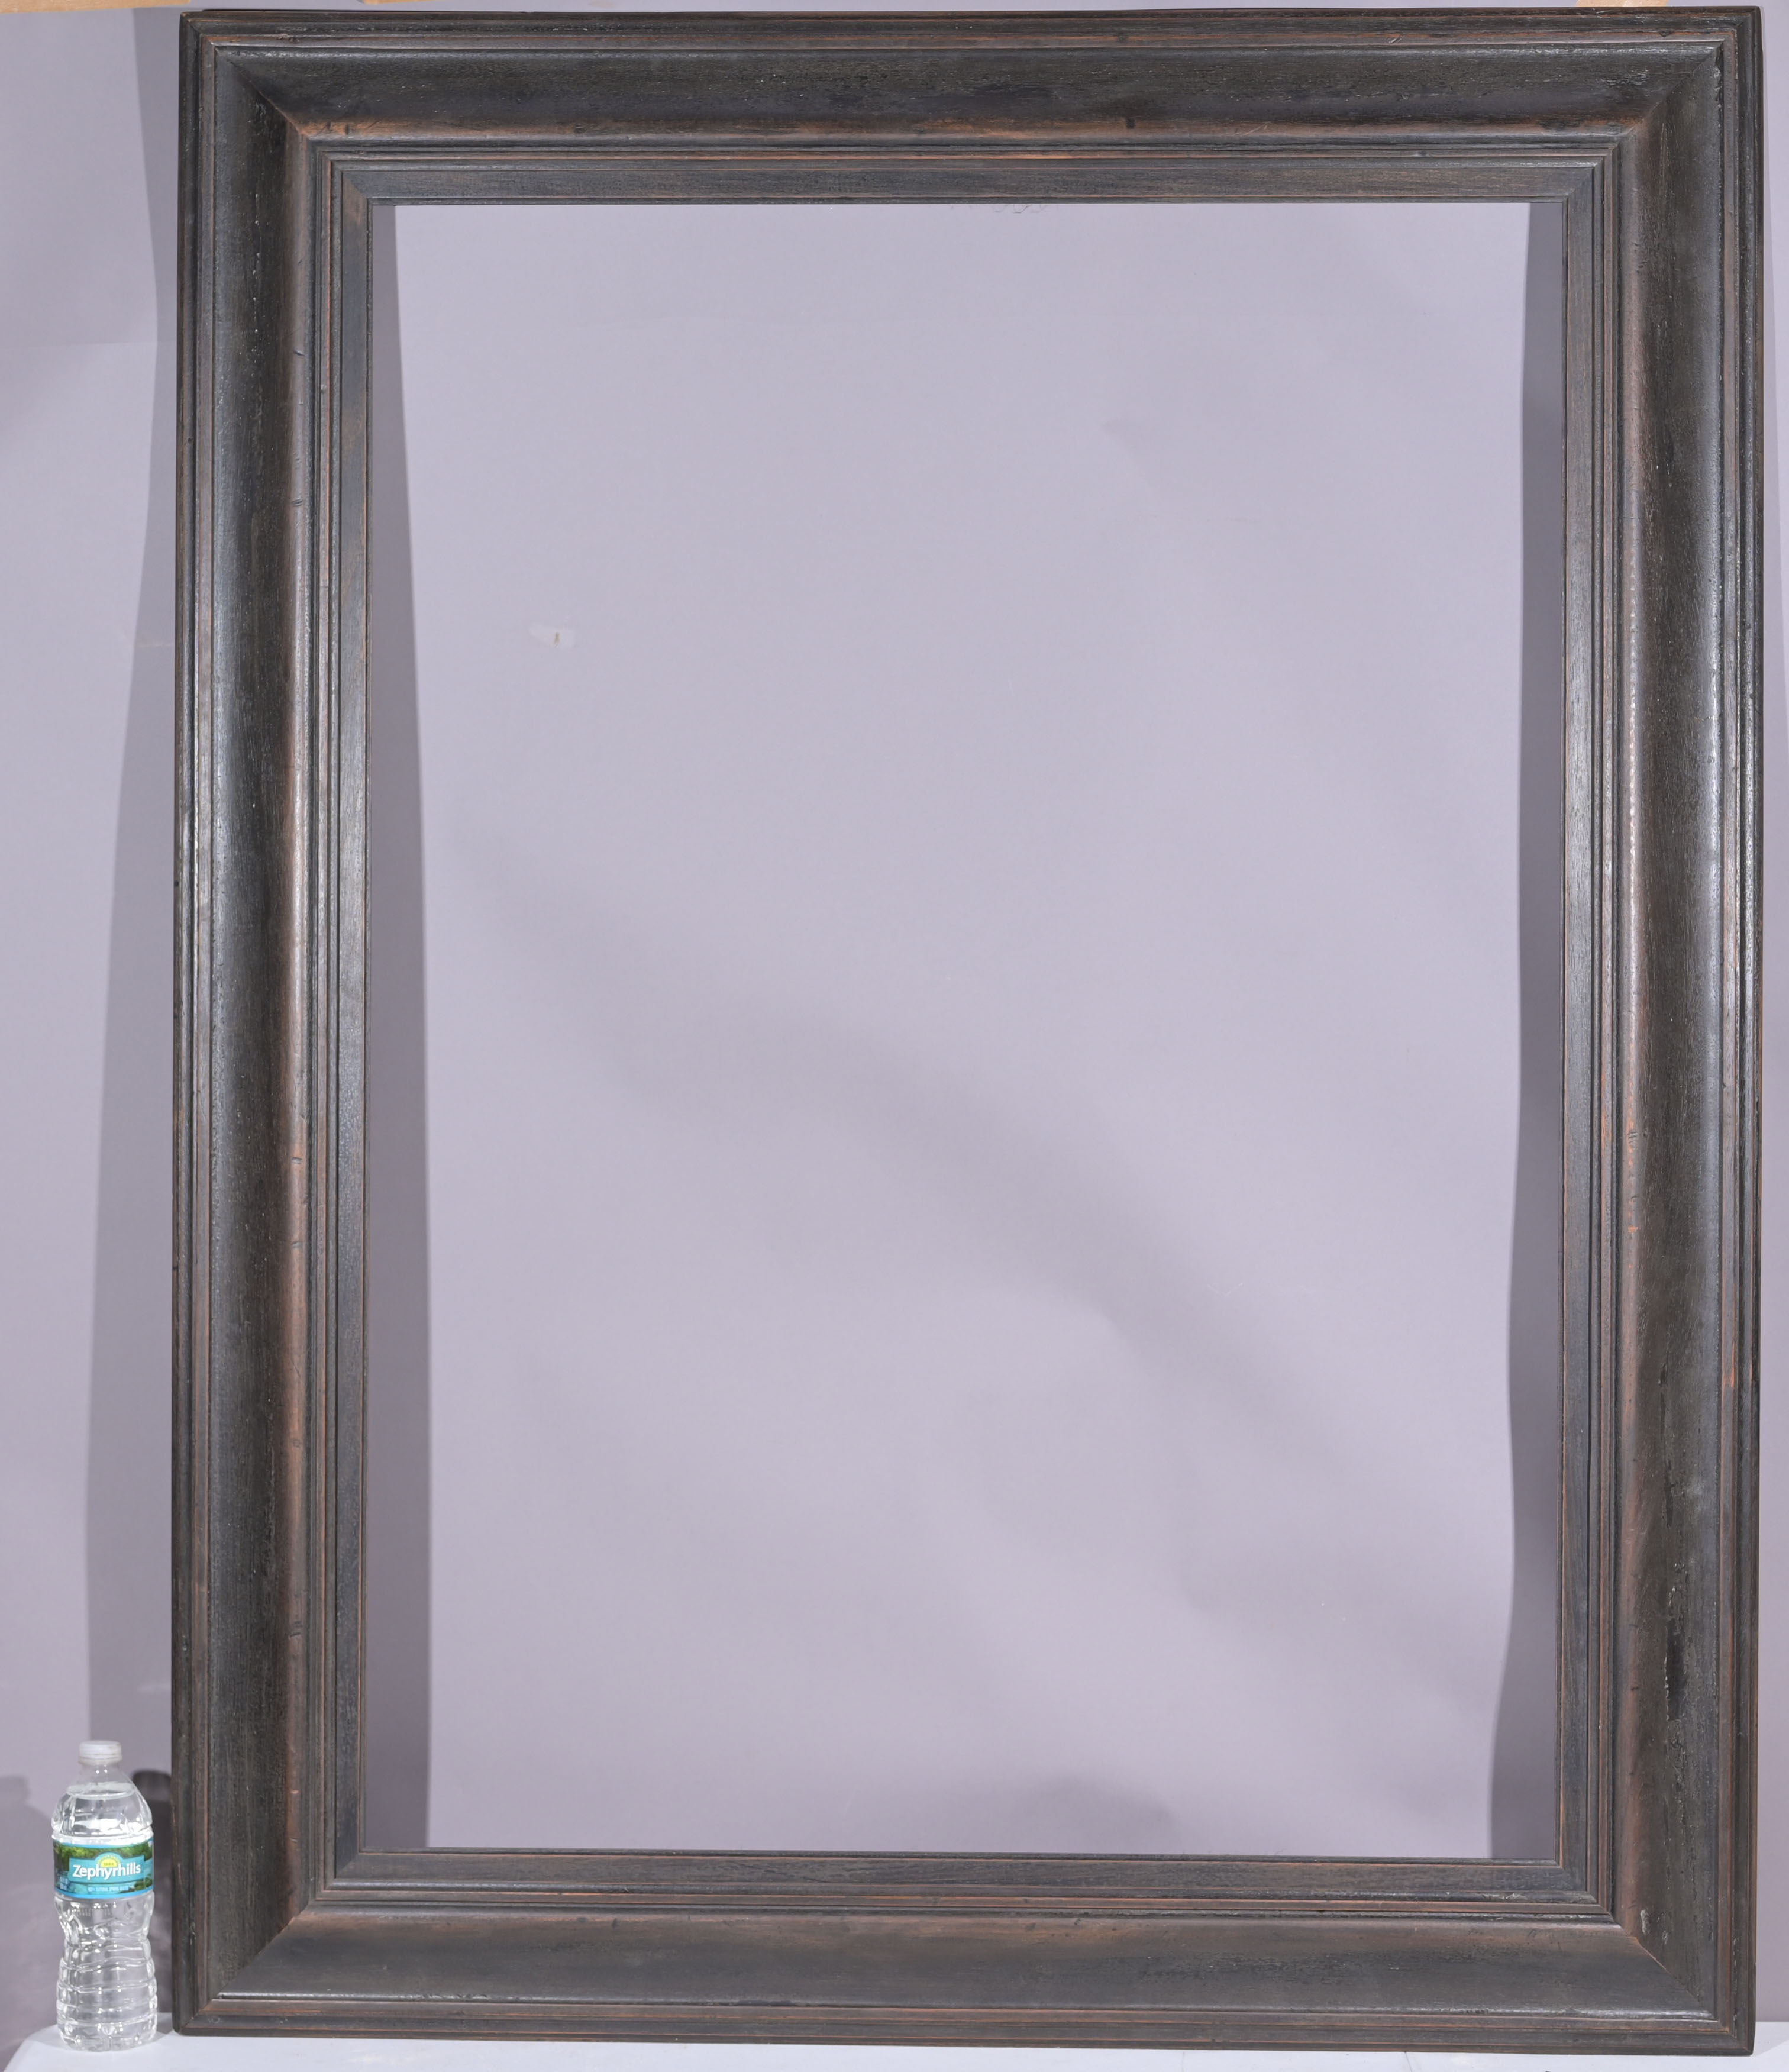 c.1900's Wooden Frame - 43 x 31.25 - Image 2 of 9